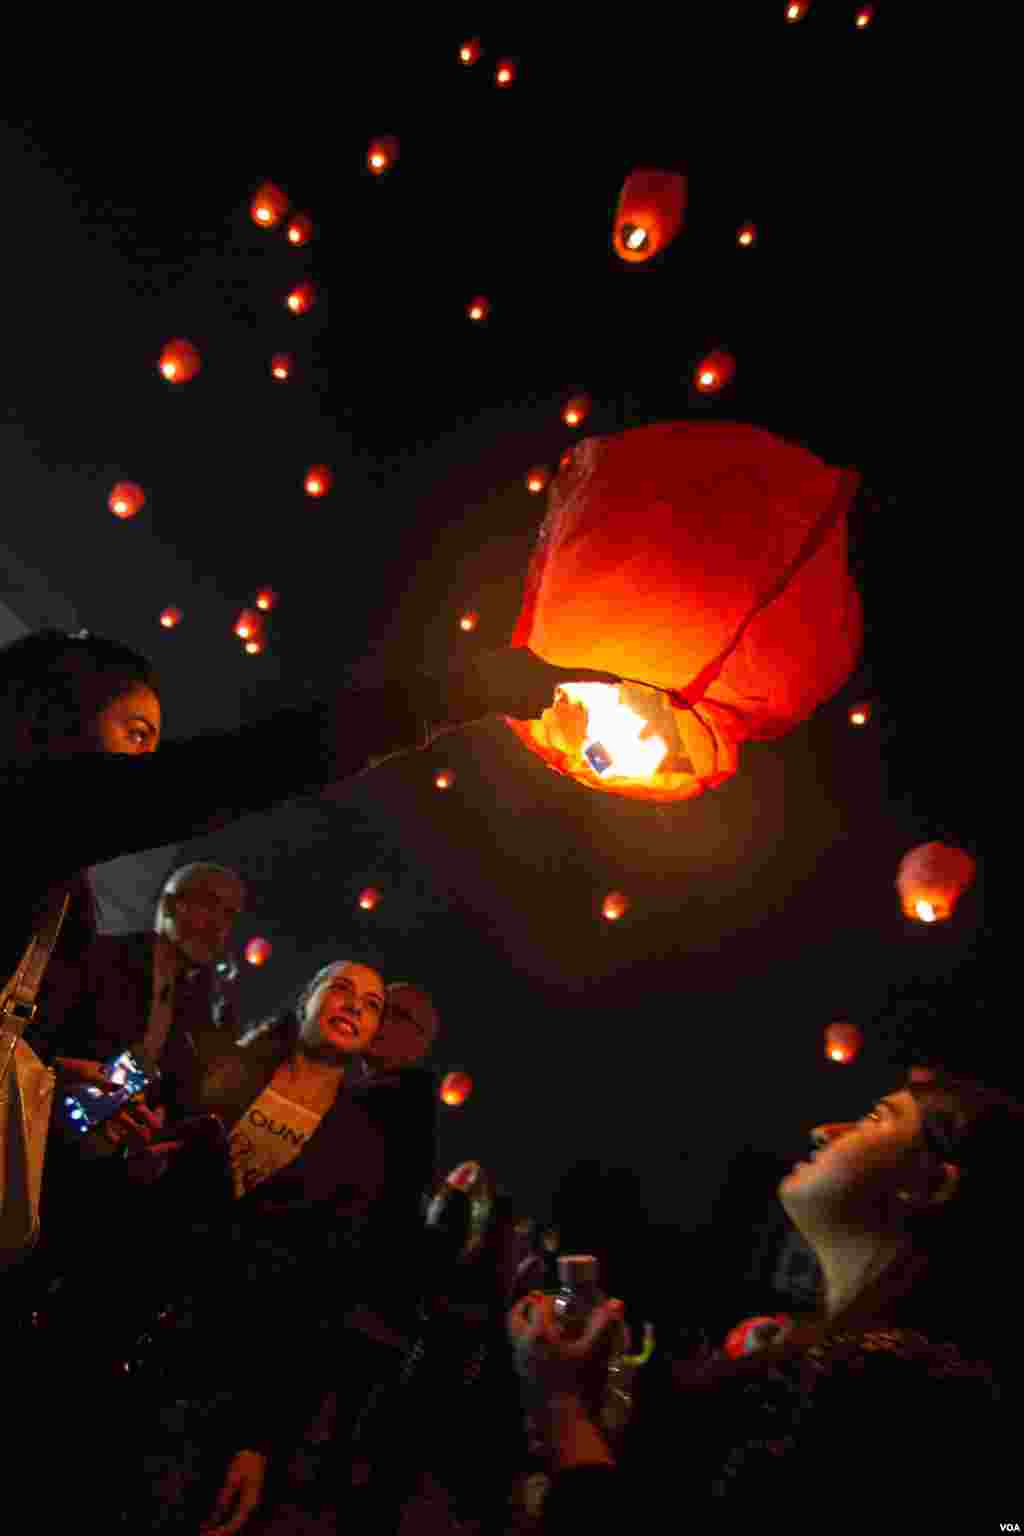 Lanterns are released into the night sky as part of the commemorations of the mass killings. (John Owen/VOA)